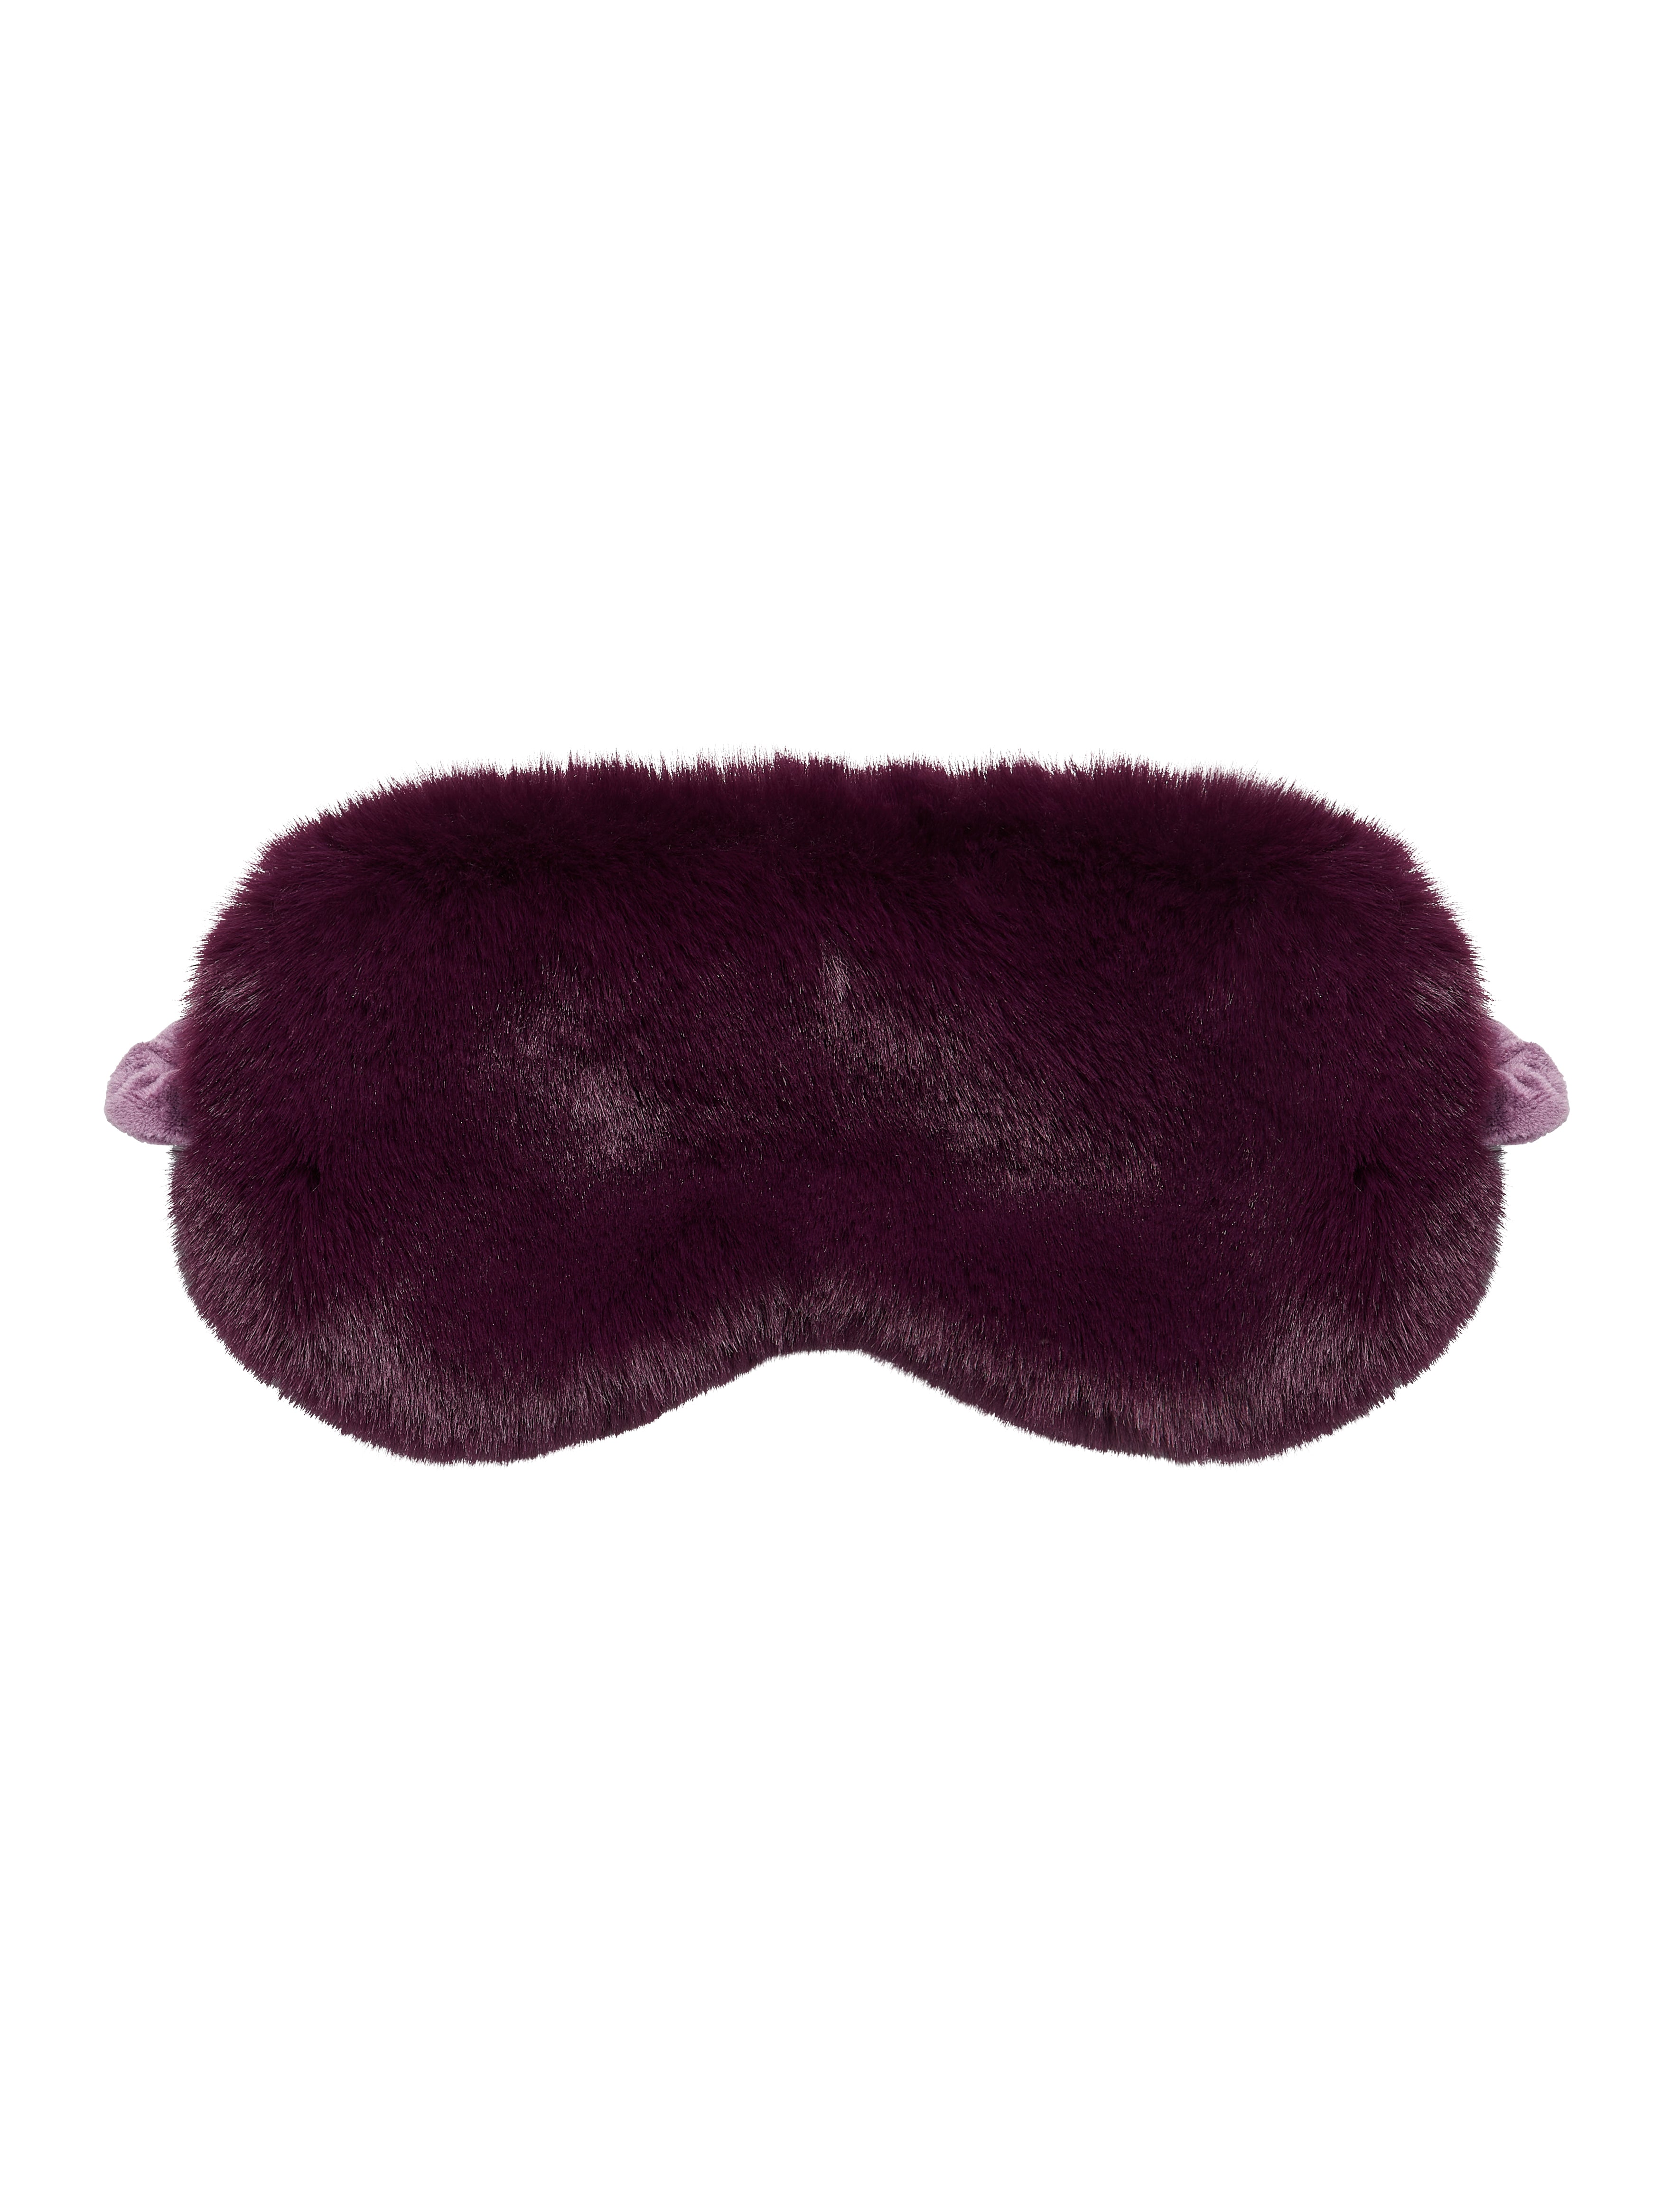 FAUX FUR HOT WATER BOTTLE AND EYE MASK-PLUM